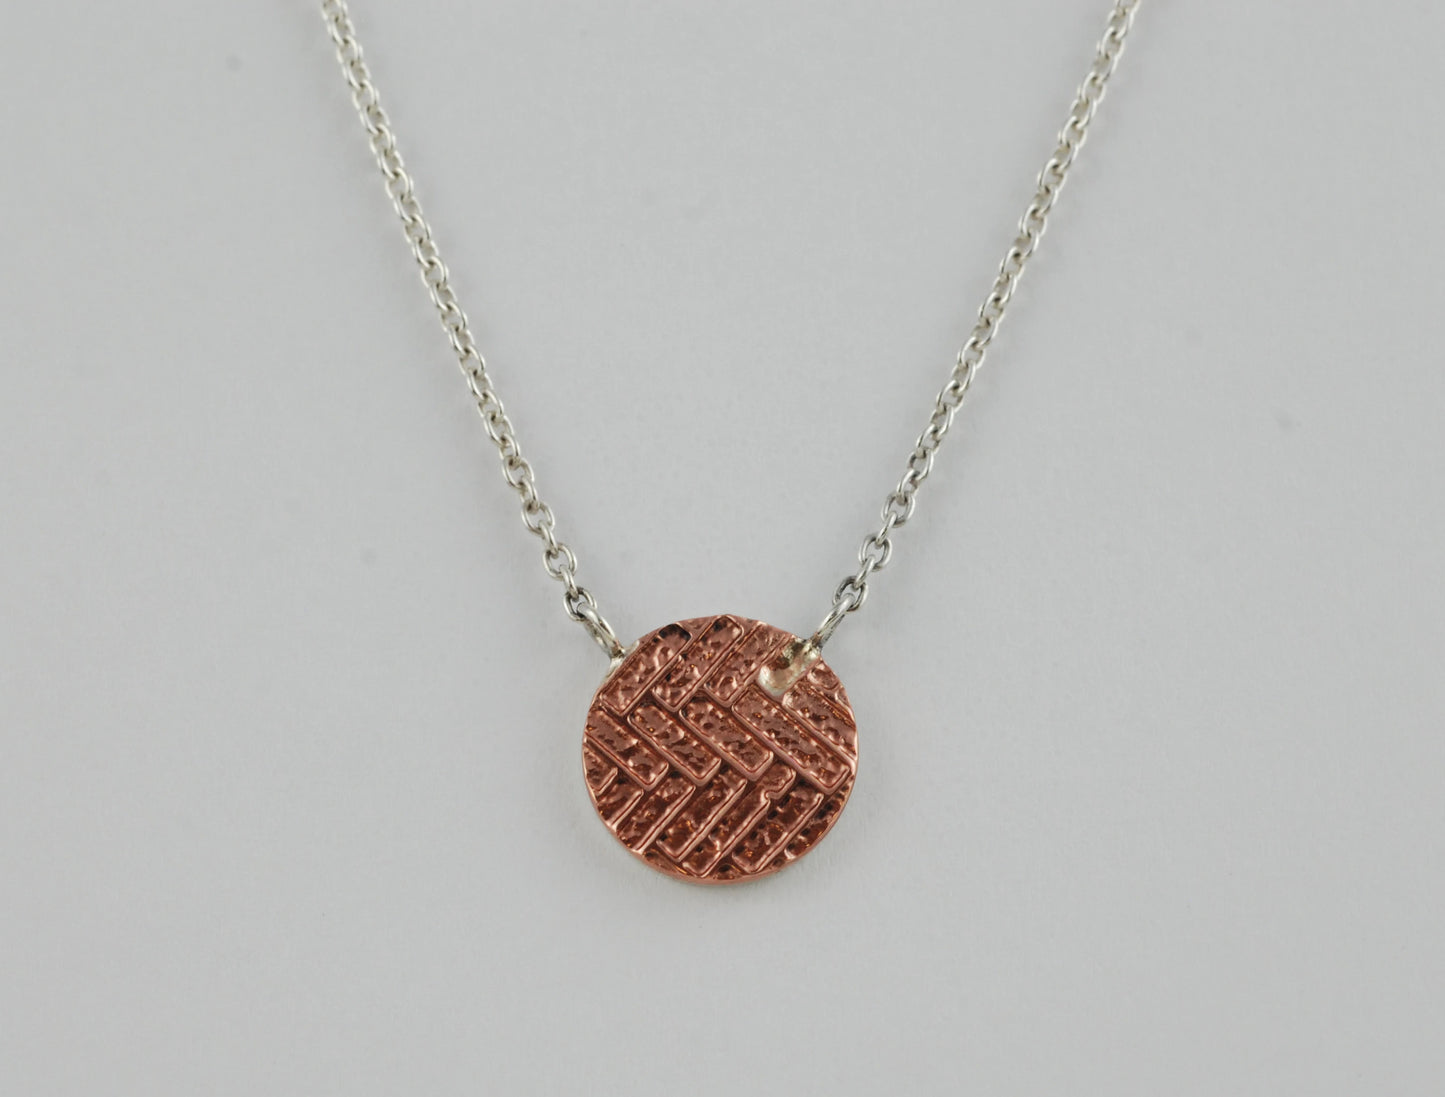 Statement Sterling Silver Necklace with Copper Textured Circle